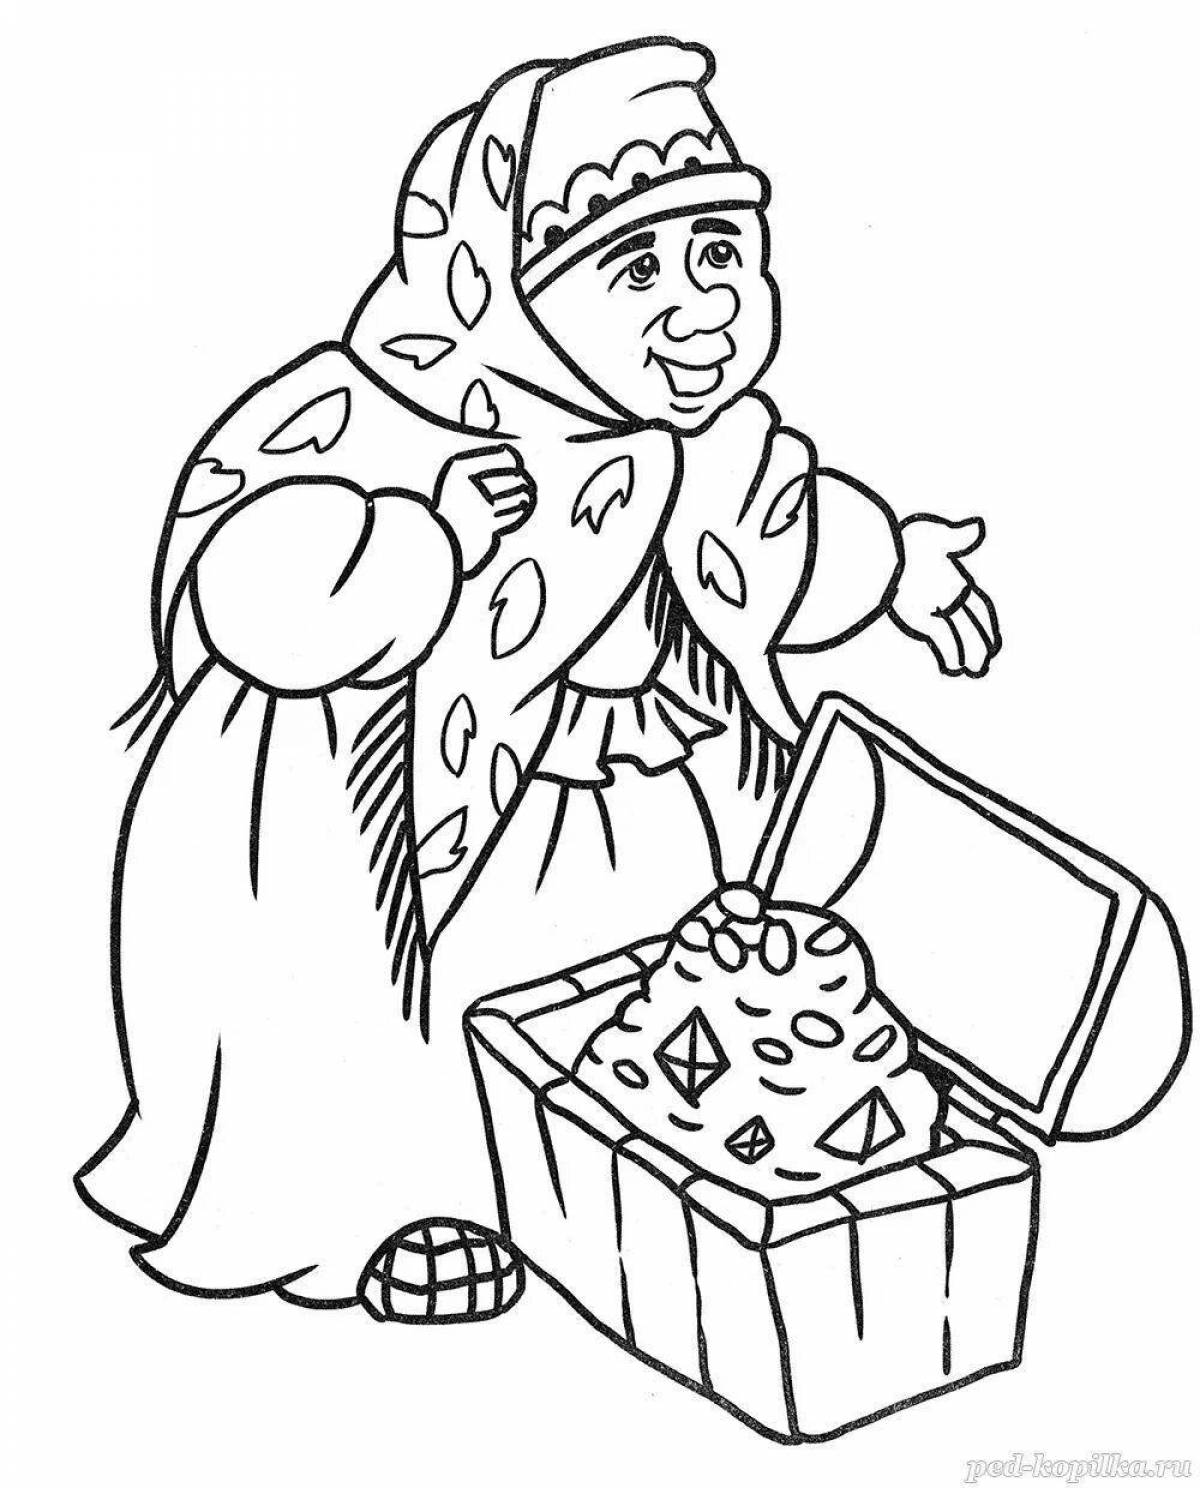 A fascinating coloring book based on Morozko's fairy tale